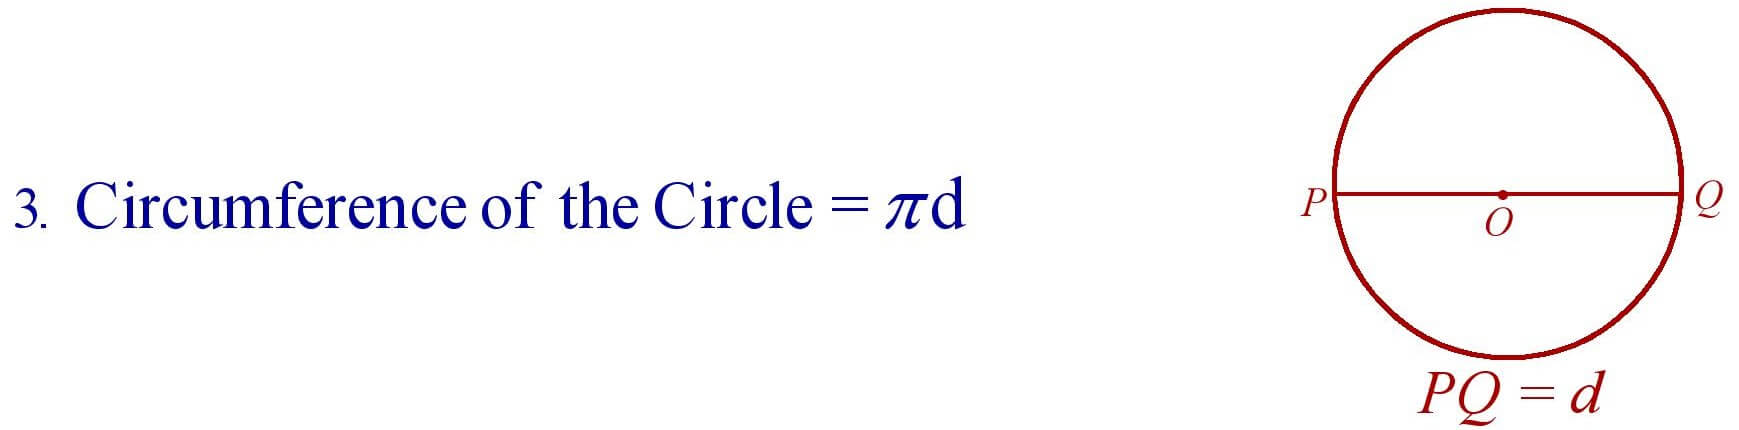 Circumference of the Circle